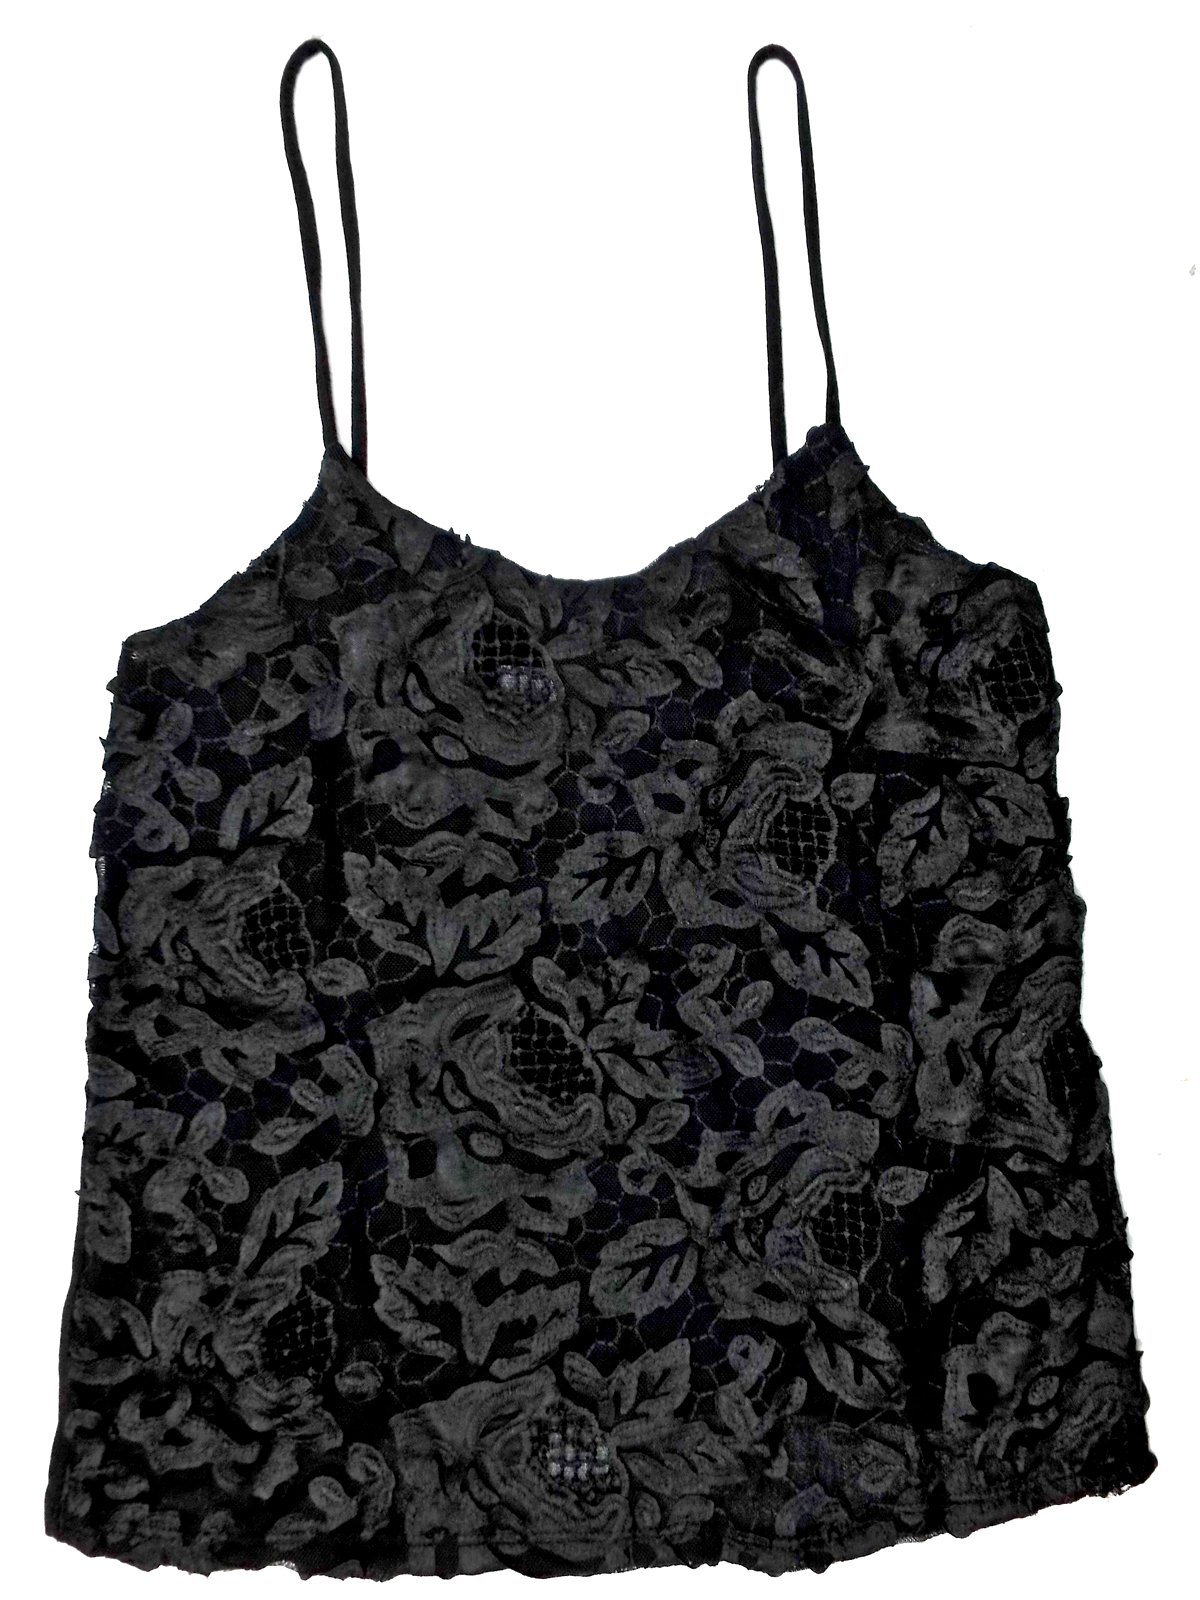 BLACK Lace Front Strappy Top - Size 6 to 12